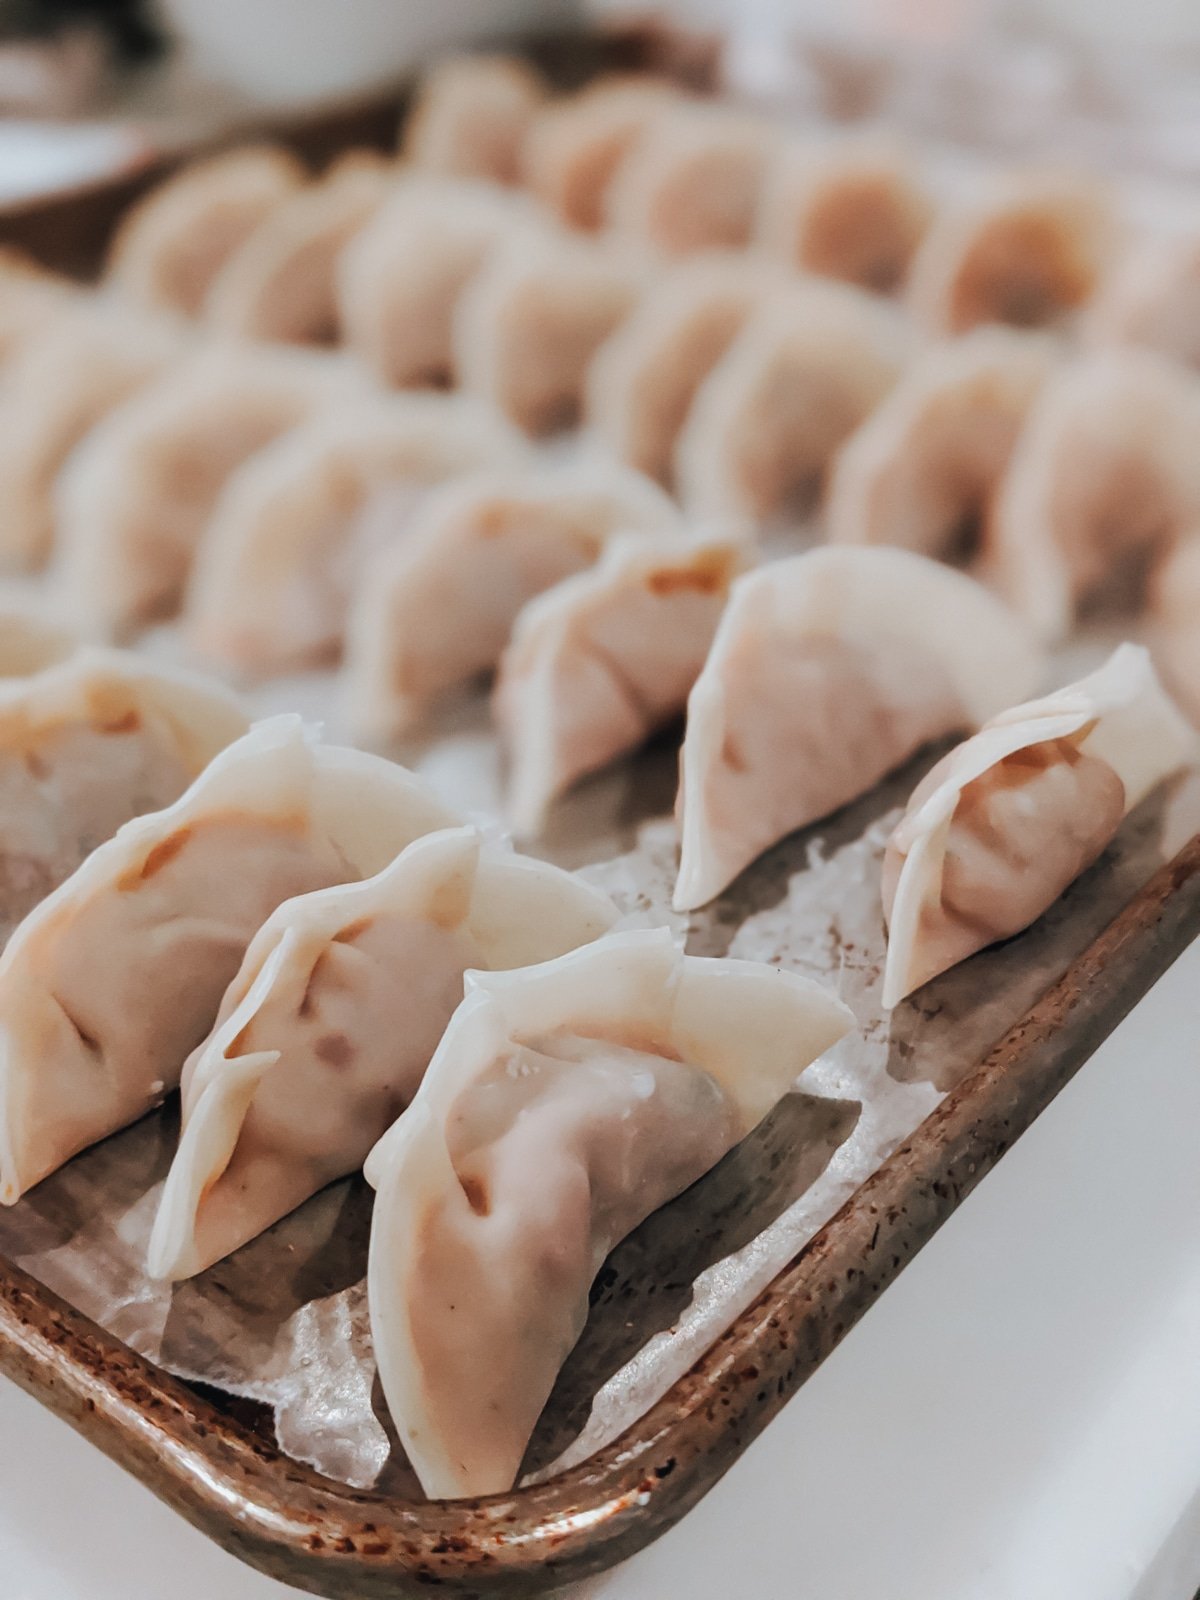 dumplings made, lined up in rows on a baking sheet, and ready for the freezer